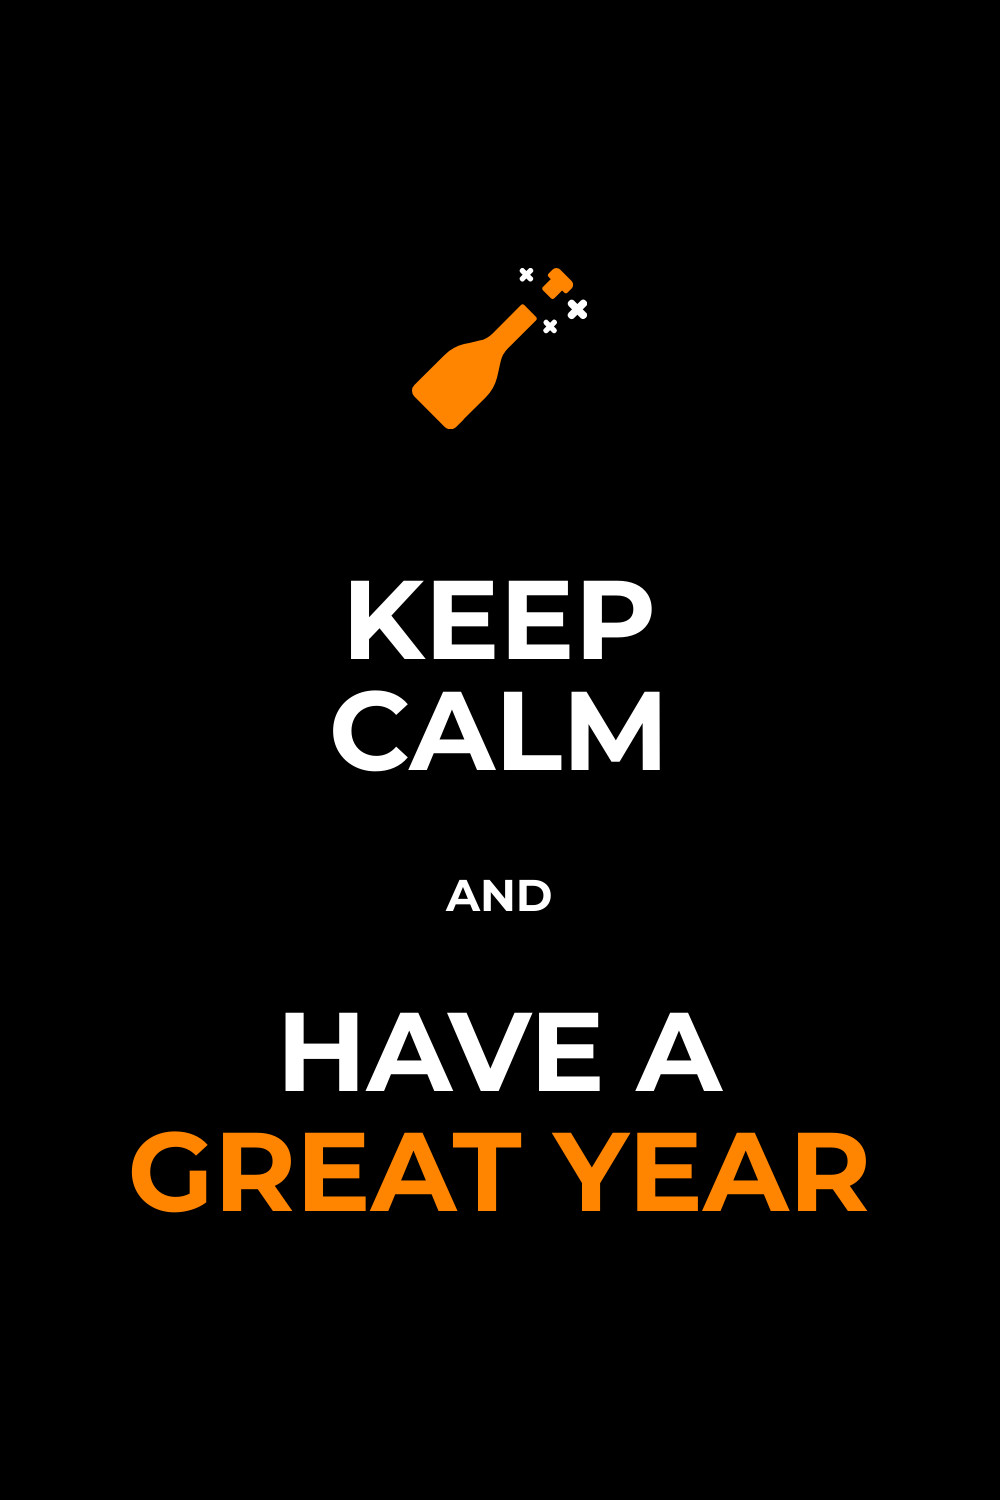 Keep Calm and Have a Great Year